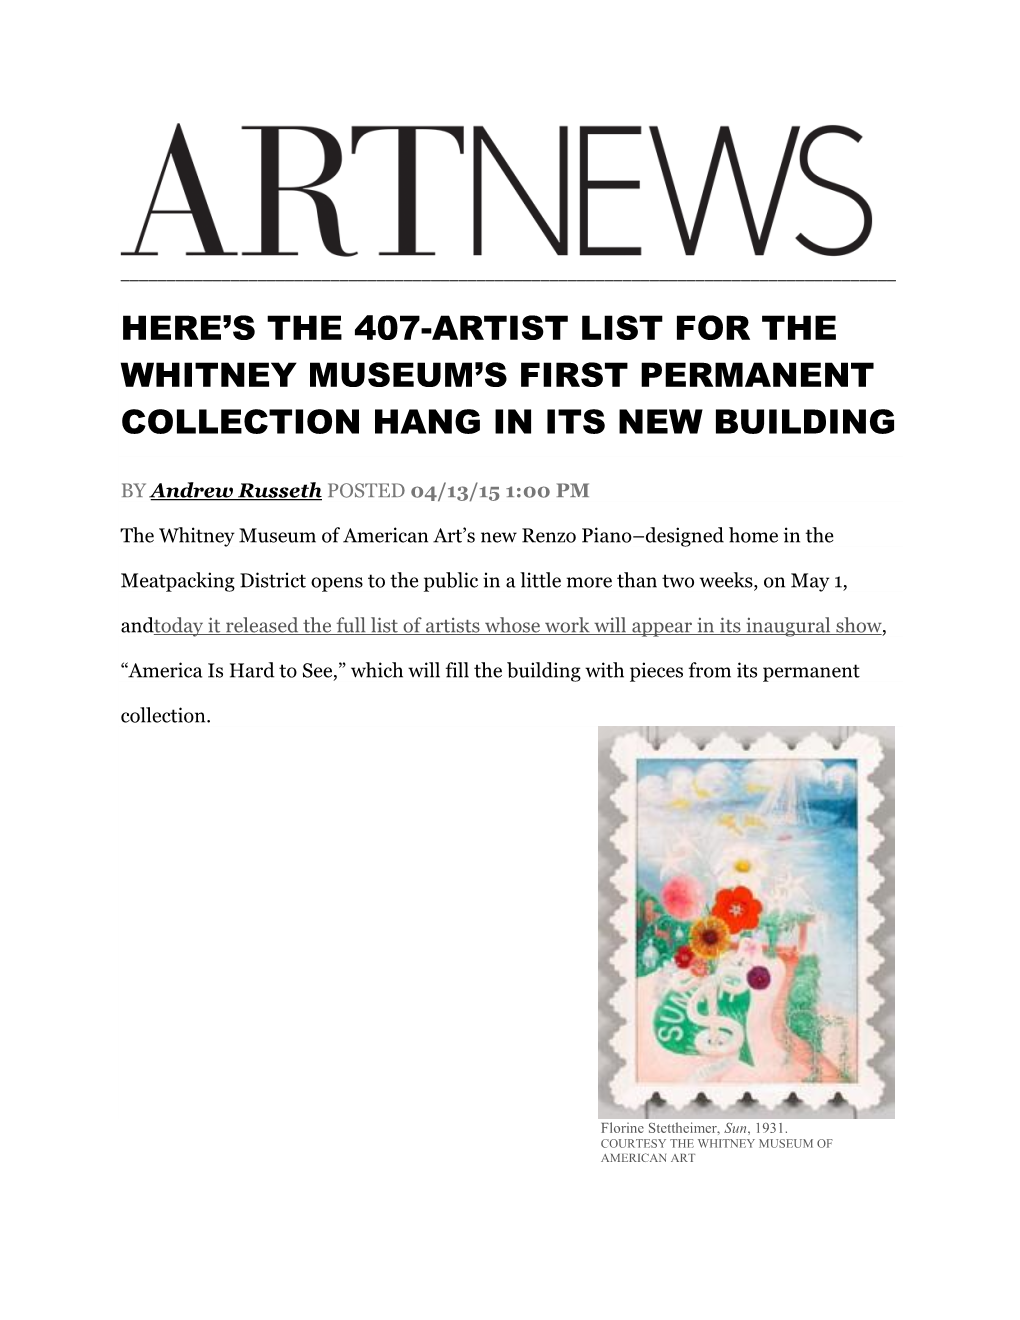 Here's the 407-Artist List for the Whitney Museum's First Permanent Collection Hang in Its New Building